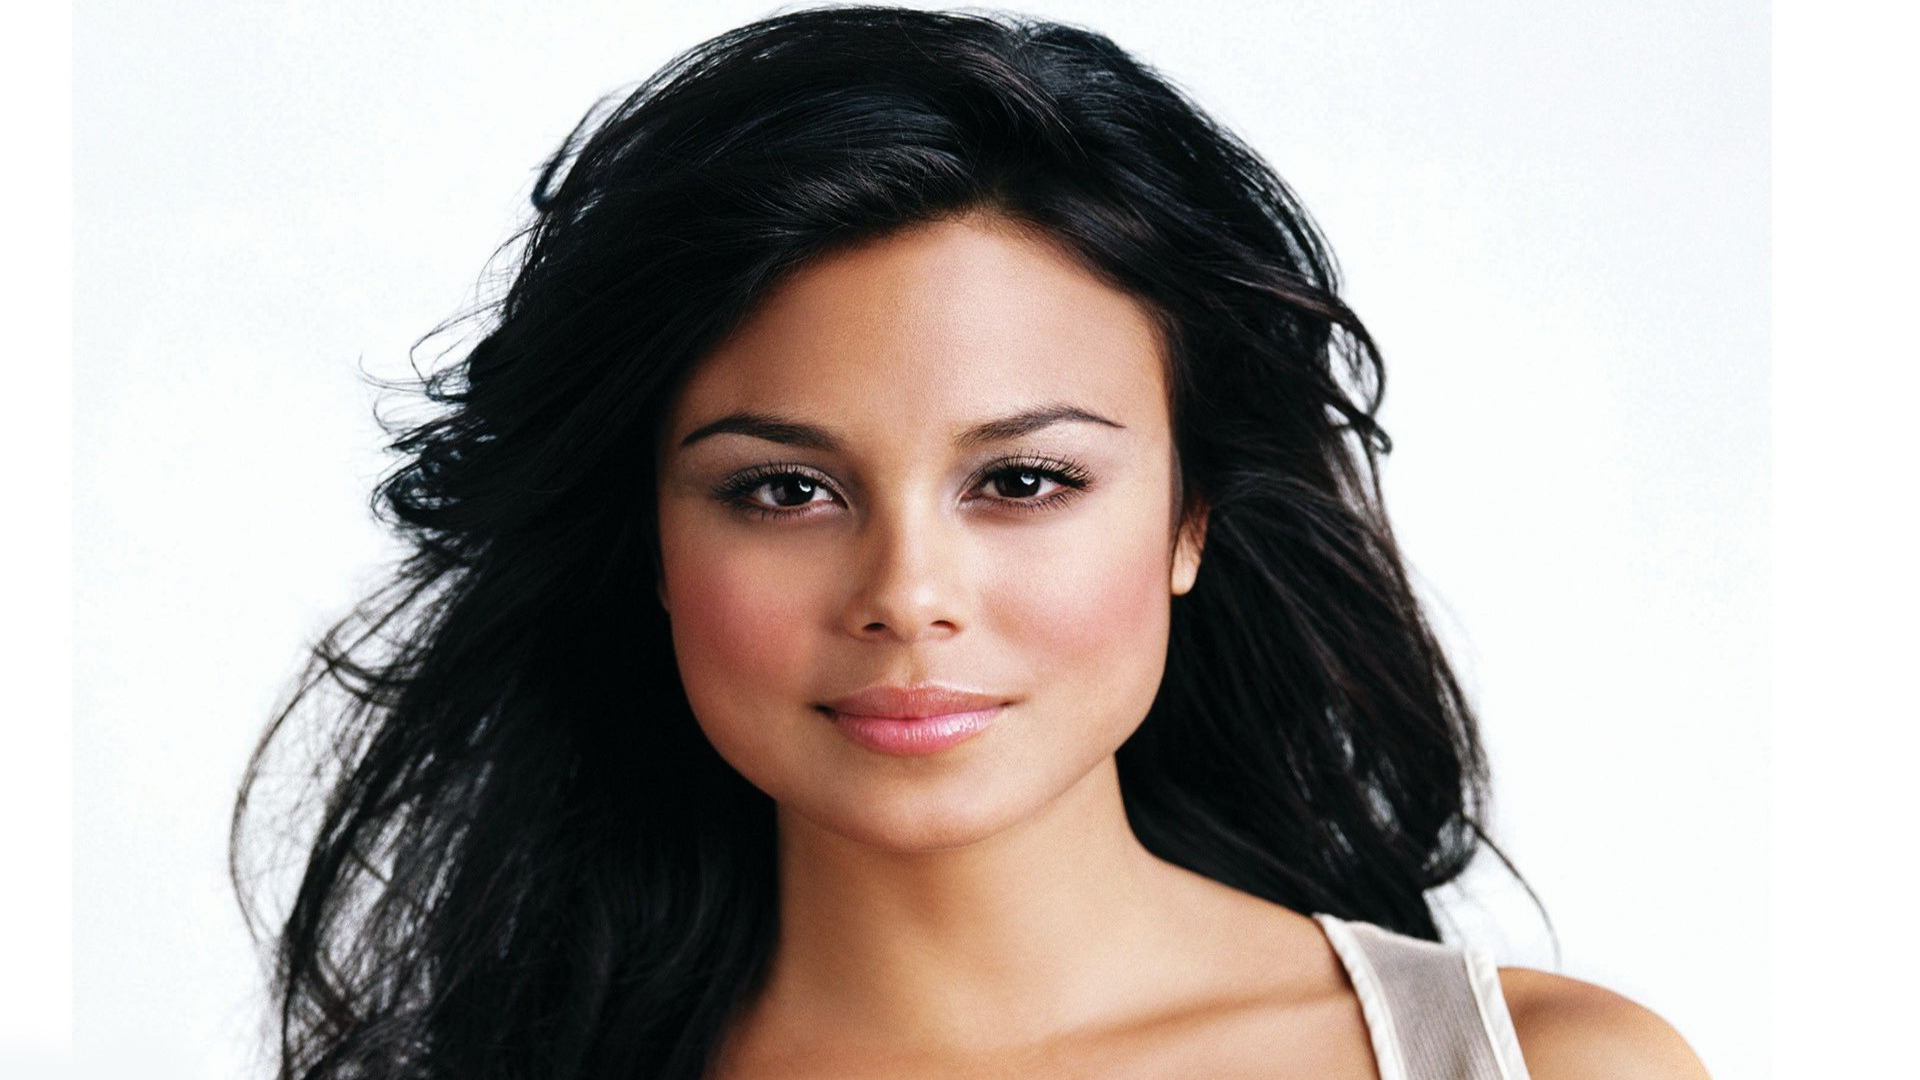 Amazing Nathalie Kelley Pictures & Backgrounds